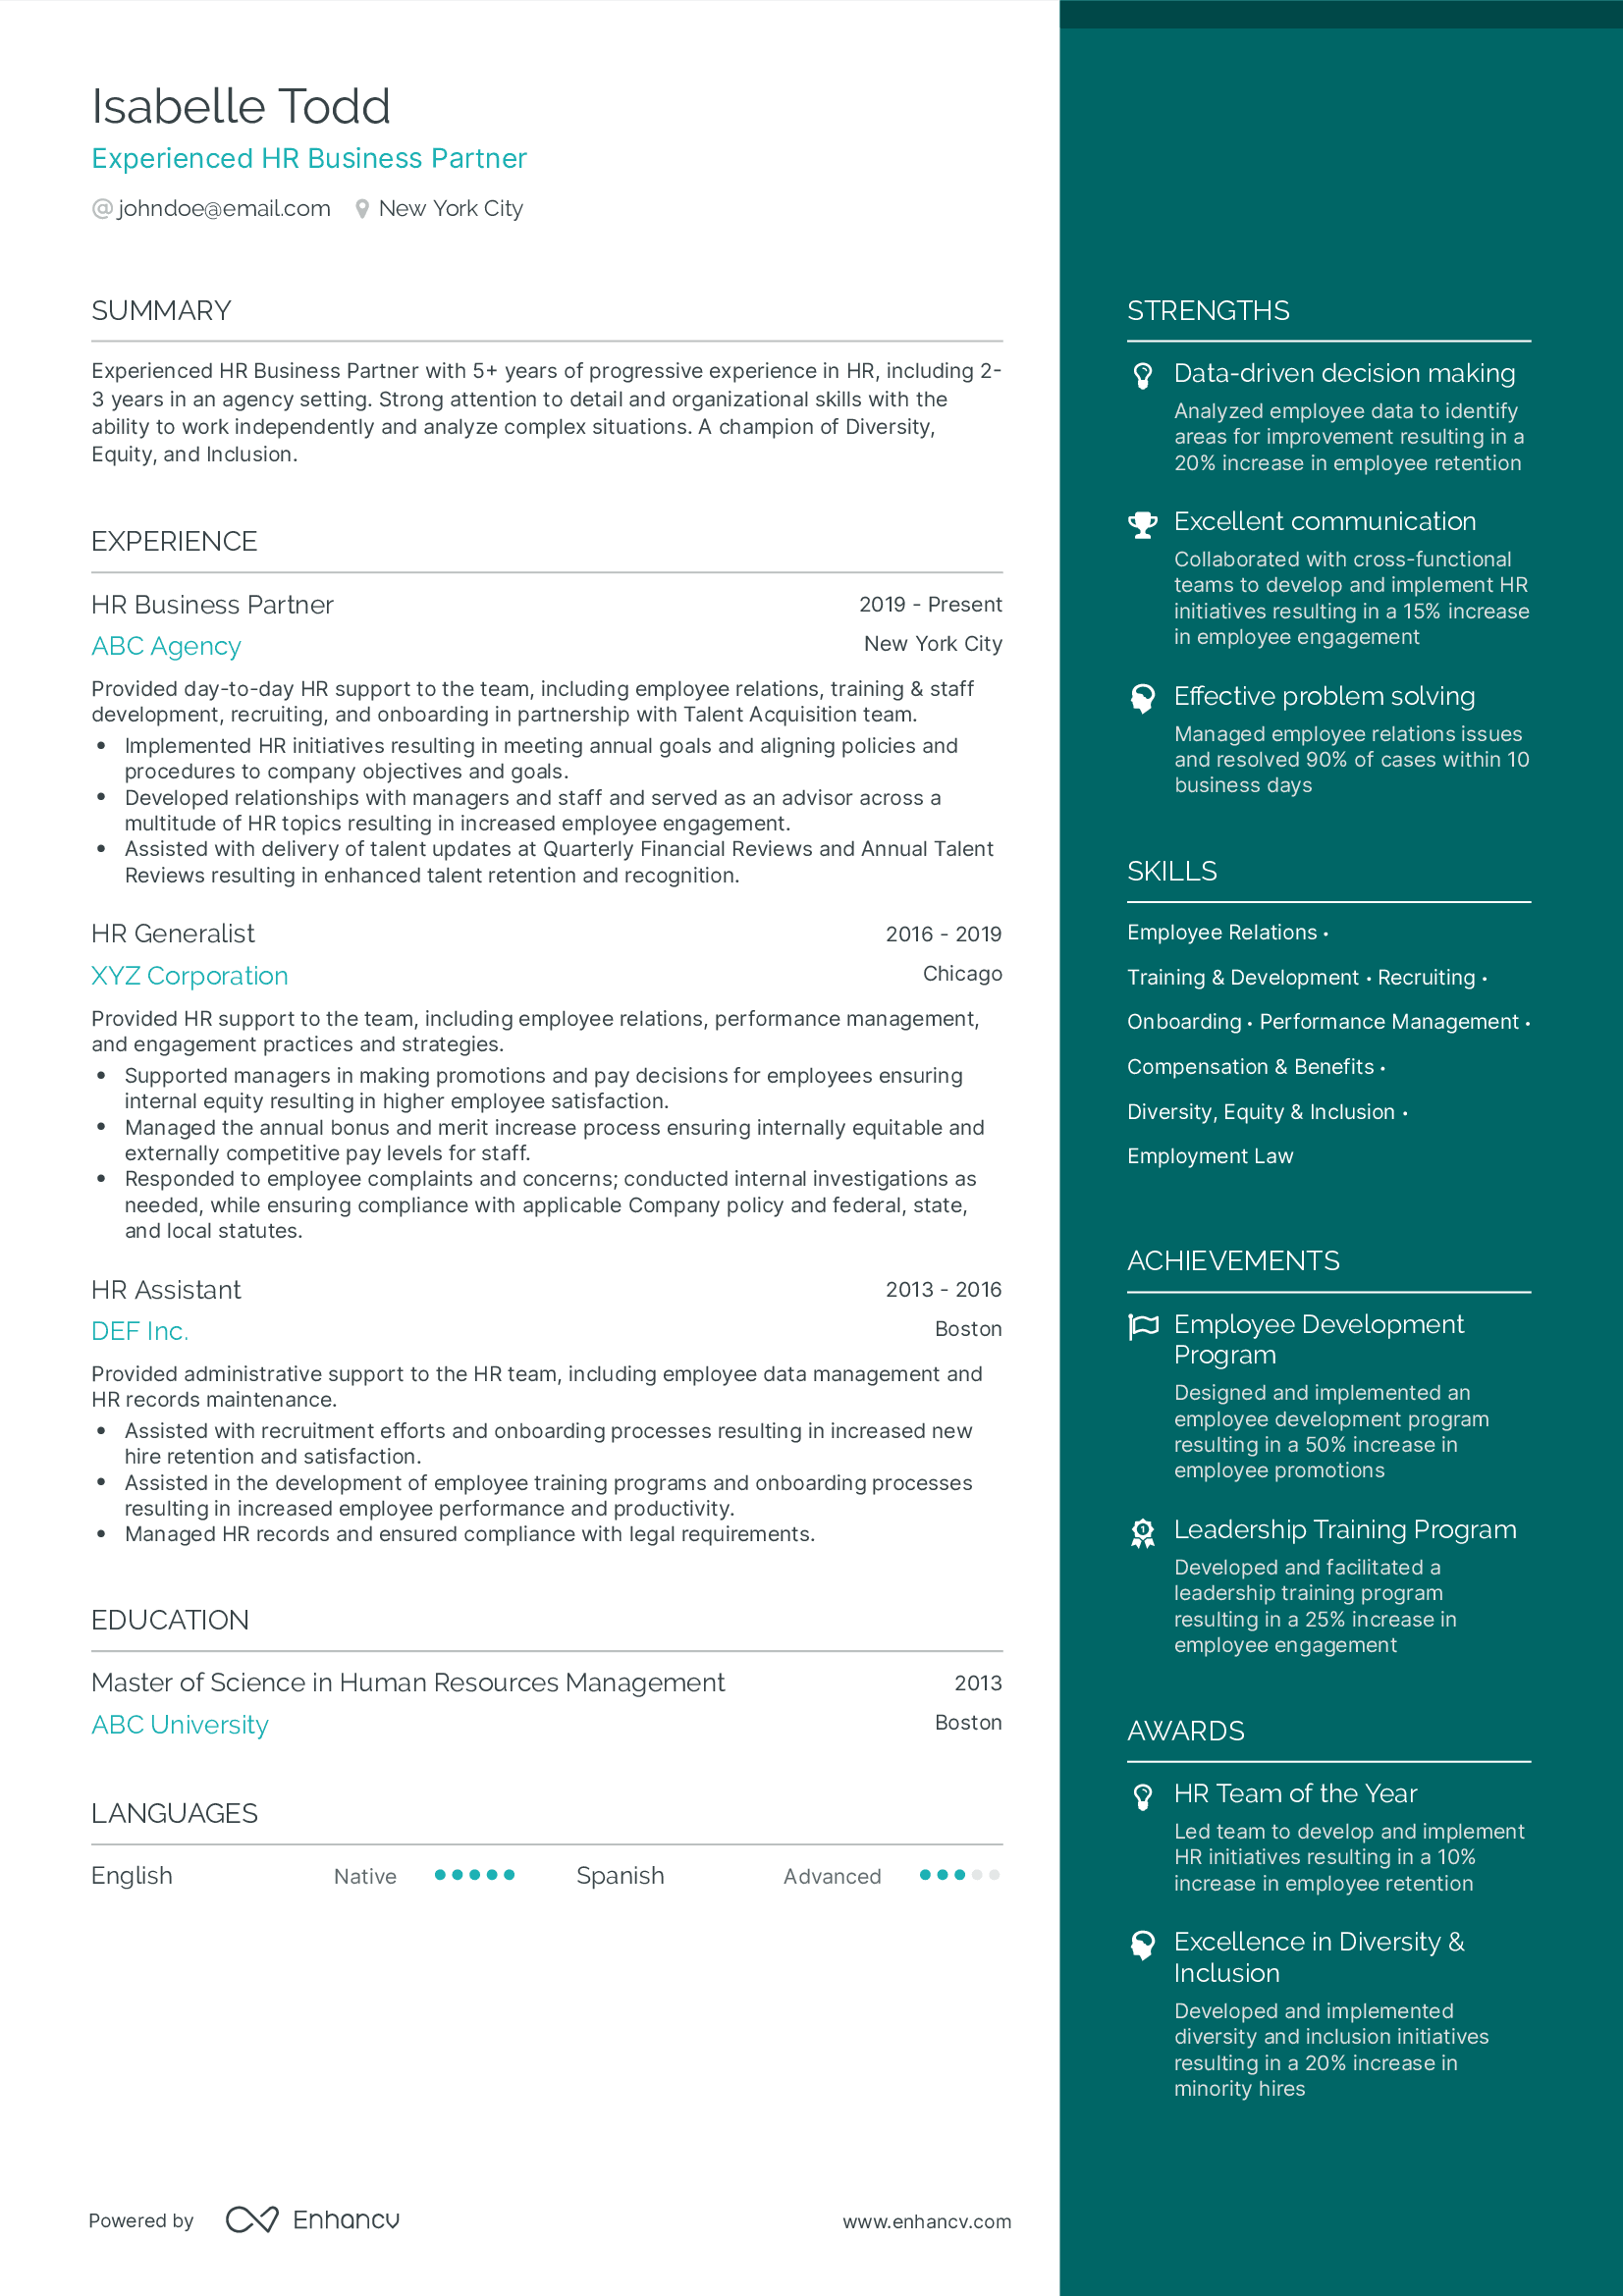 Experienced HR Business Partner resume example